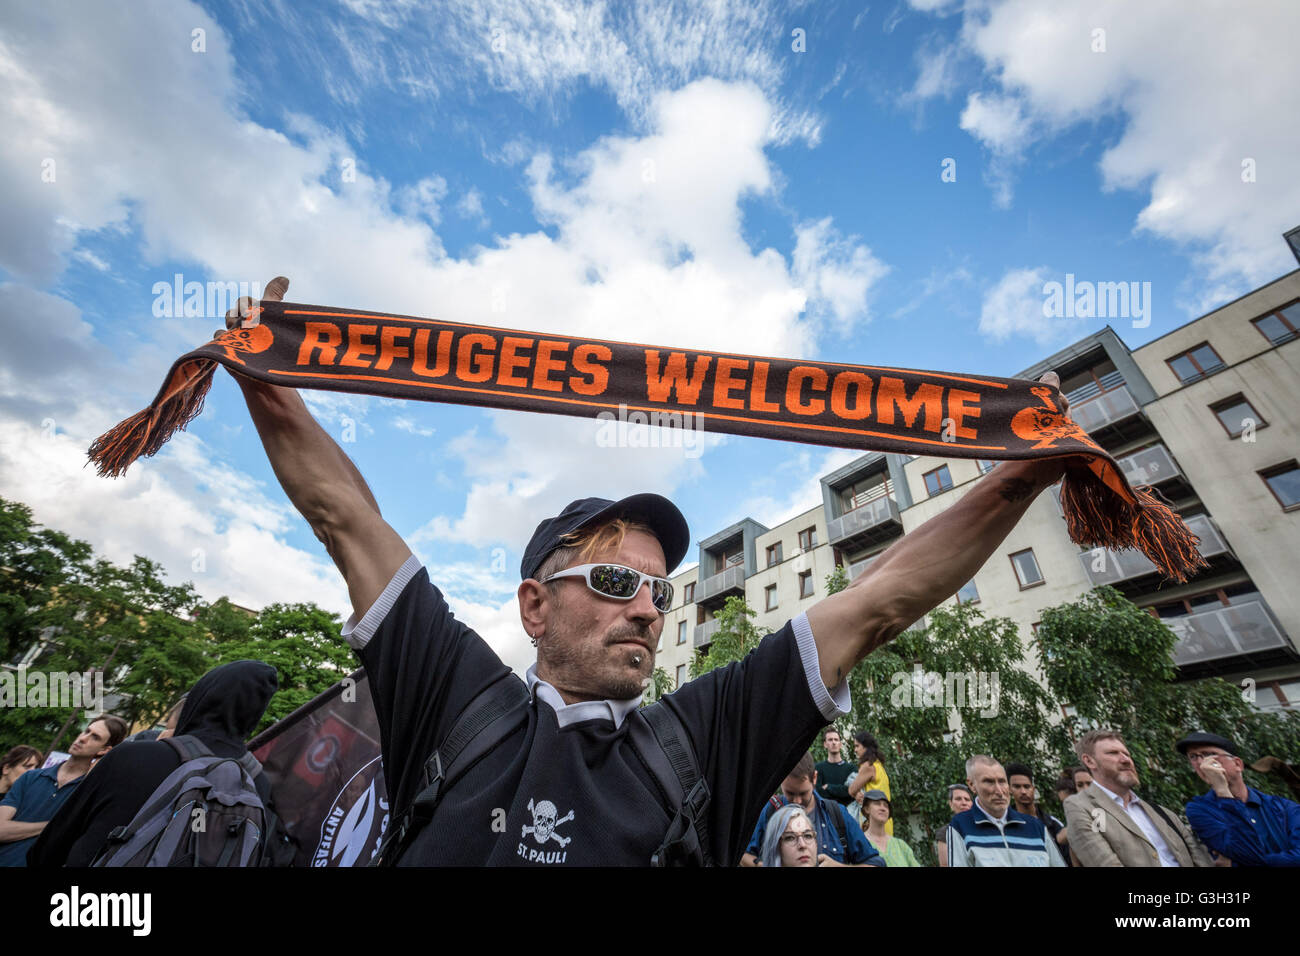 London, UK. 24th June, 2016. 'Refugees Welcome' banner. Defend All Migrants. A post EU referendum protest led by a few hundred pro-refugee protesters and anti-government anarchist groups marched from Aldgate in east London to News UK HQ in London Bridge Credit:  Guy Corbishley/Alamy Live News Stock Photo